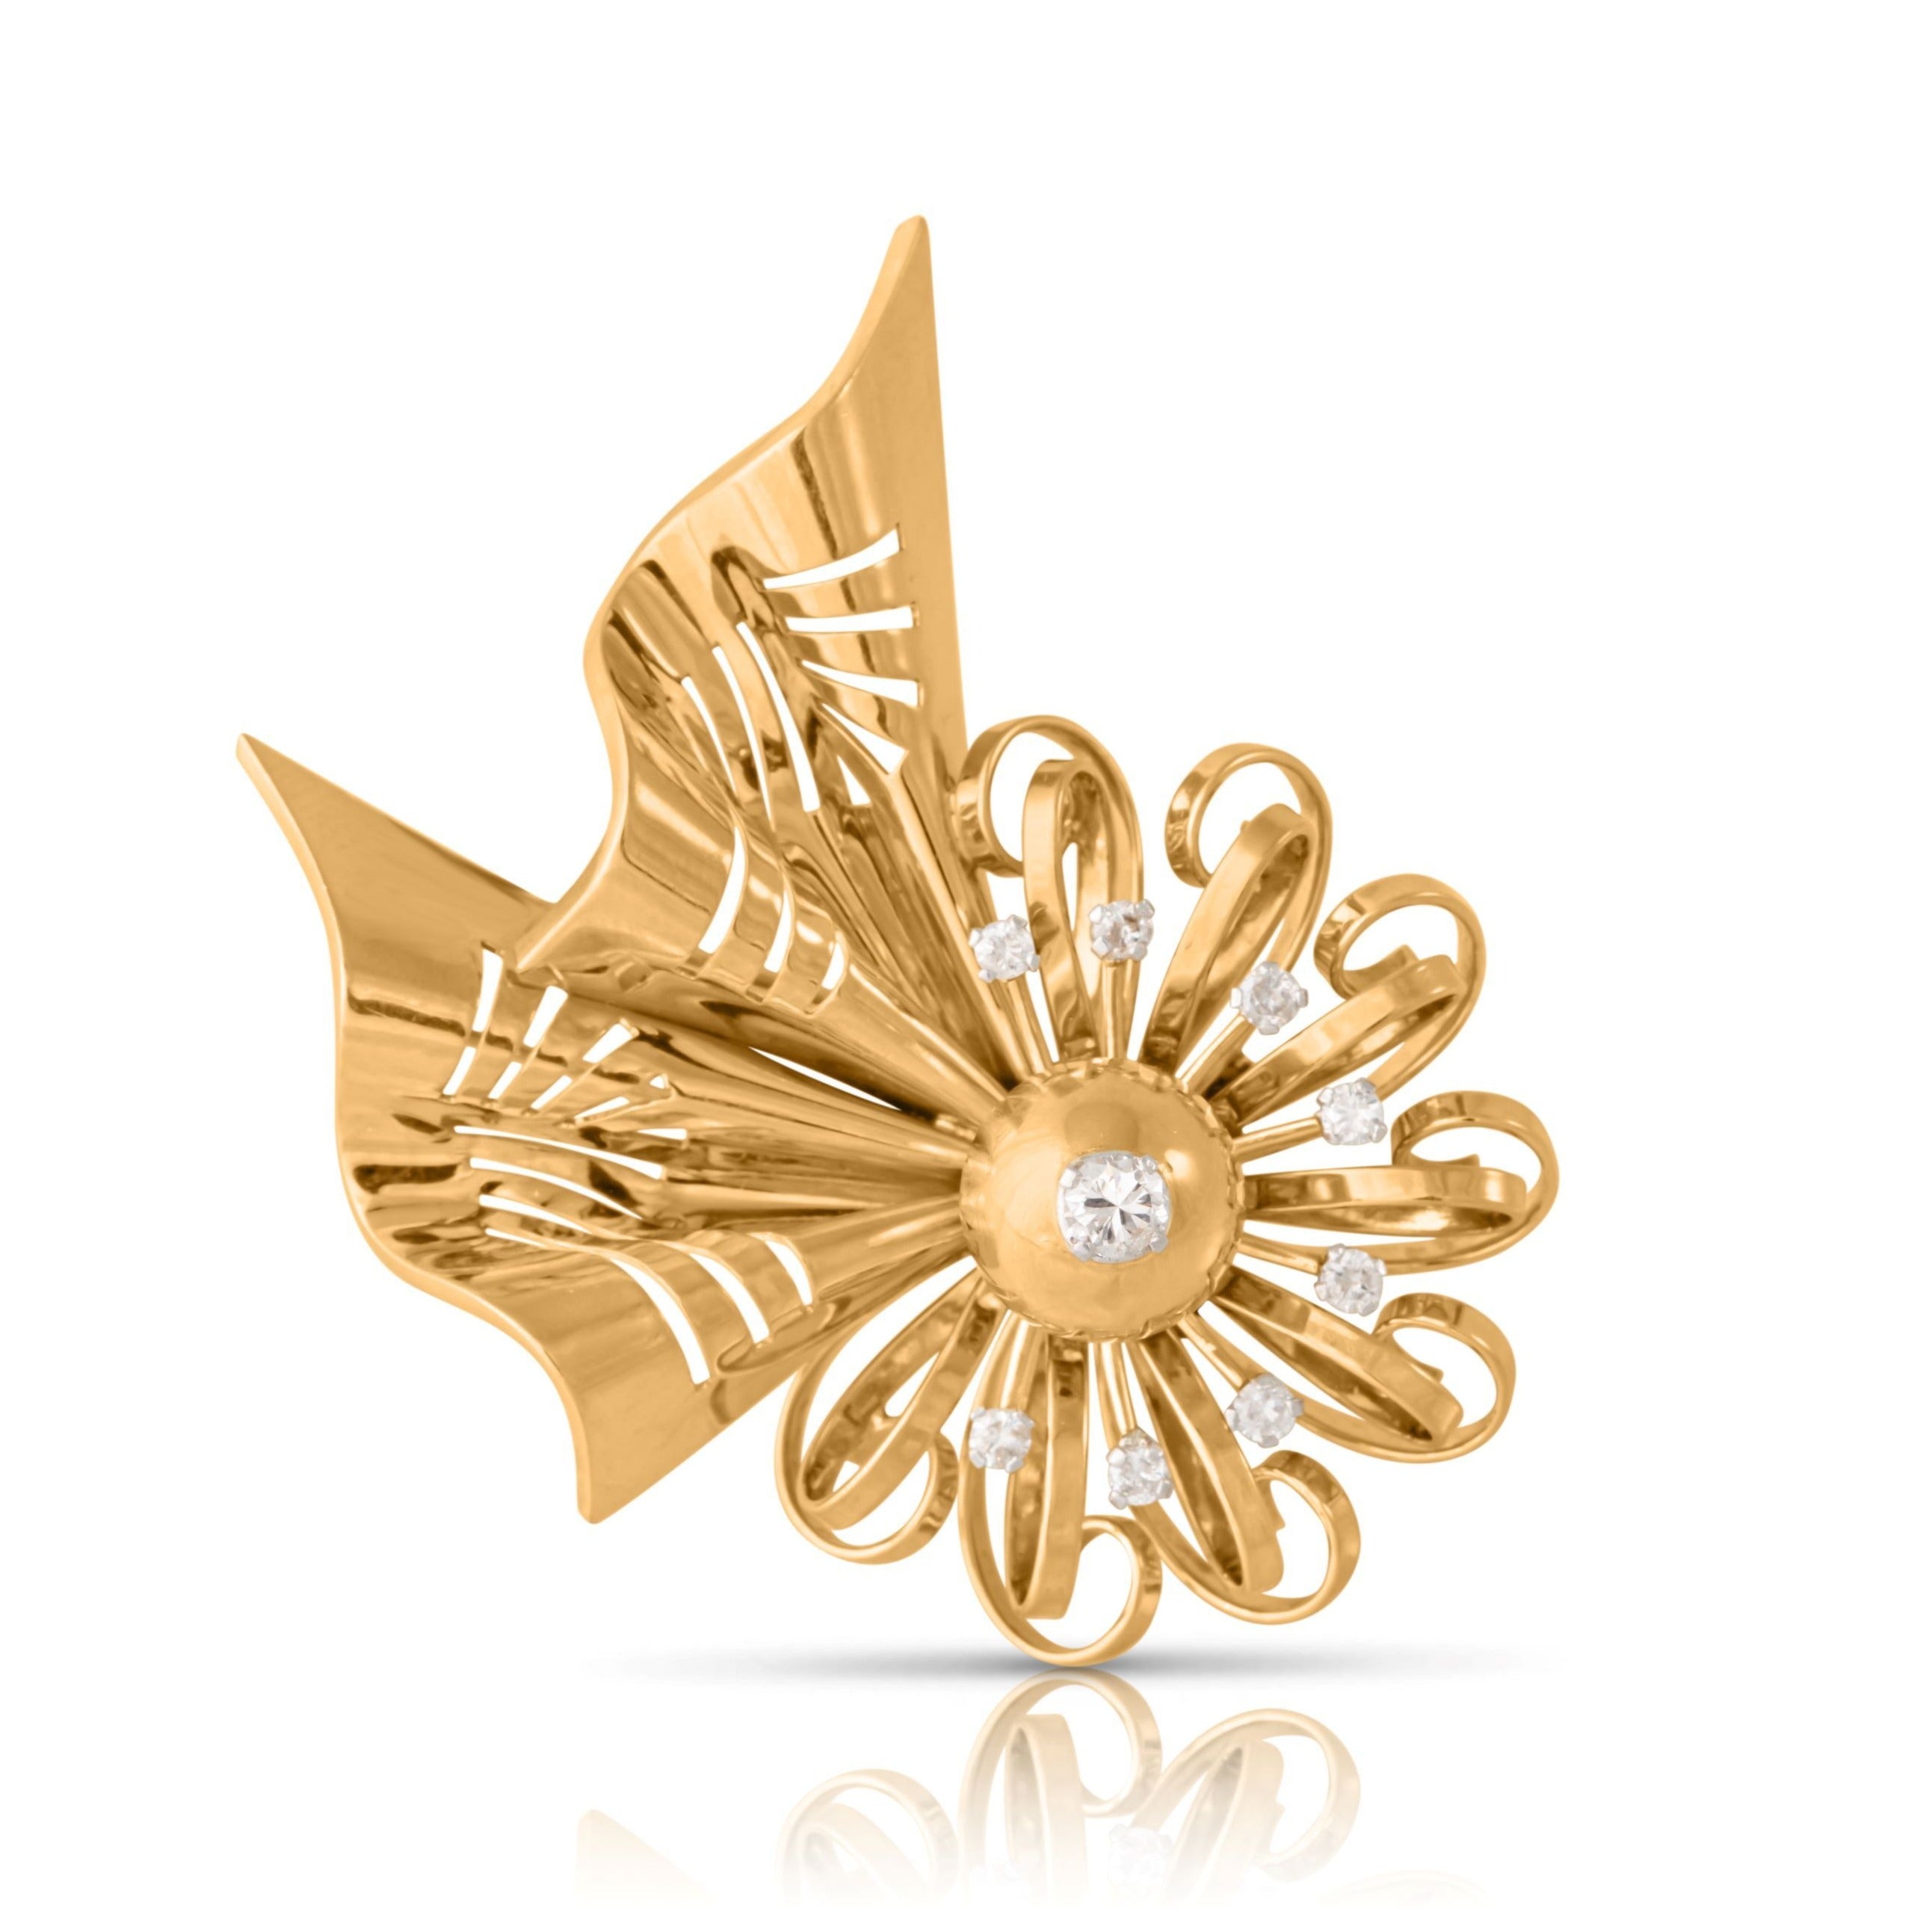 Retro ribbon and bow 18ct gold brooch with diamonds from the 1930s-1950s.